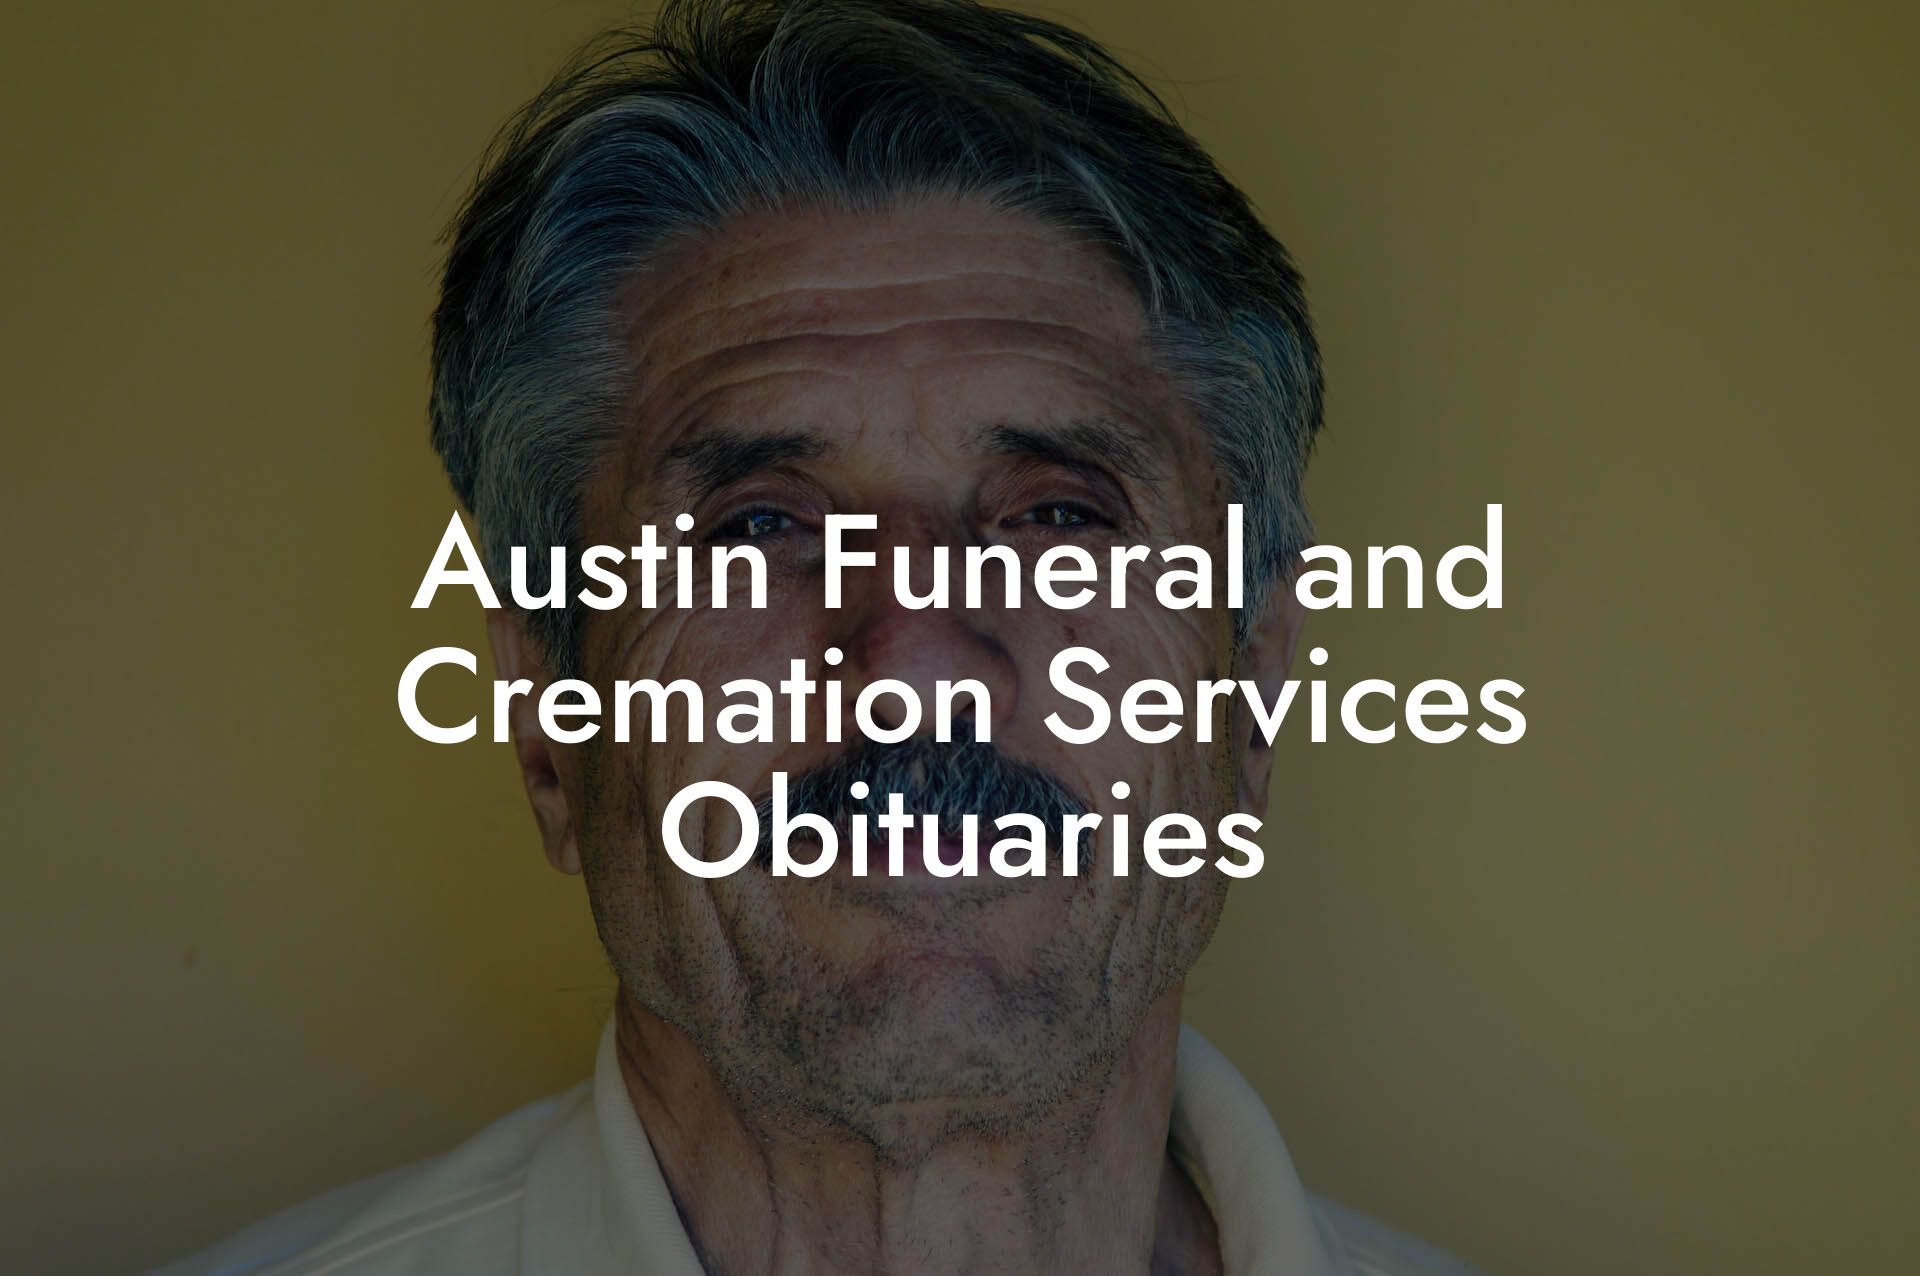 Austin Funeral and Cremation Services Obituaries